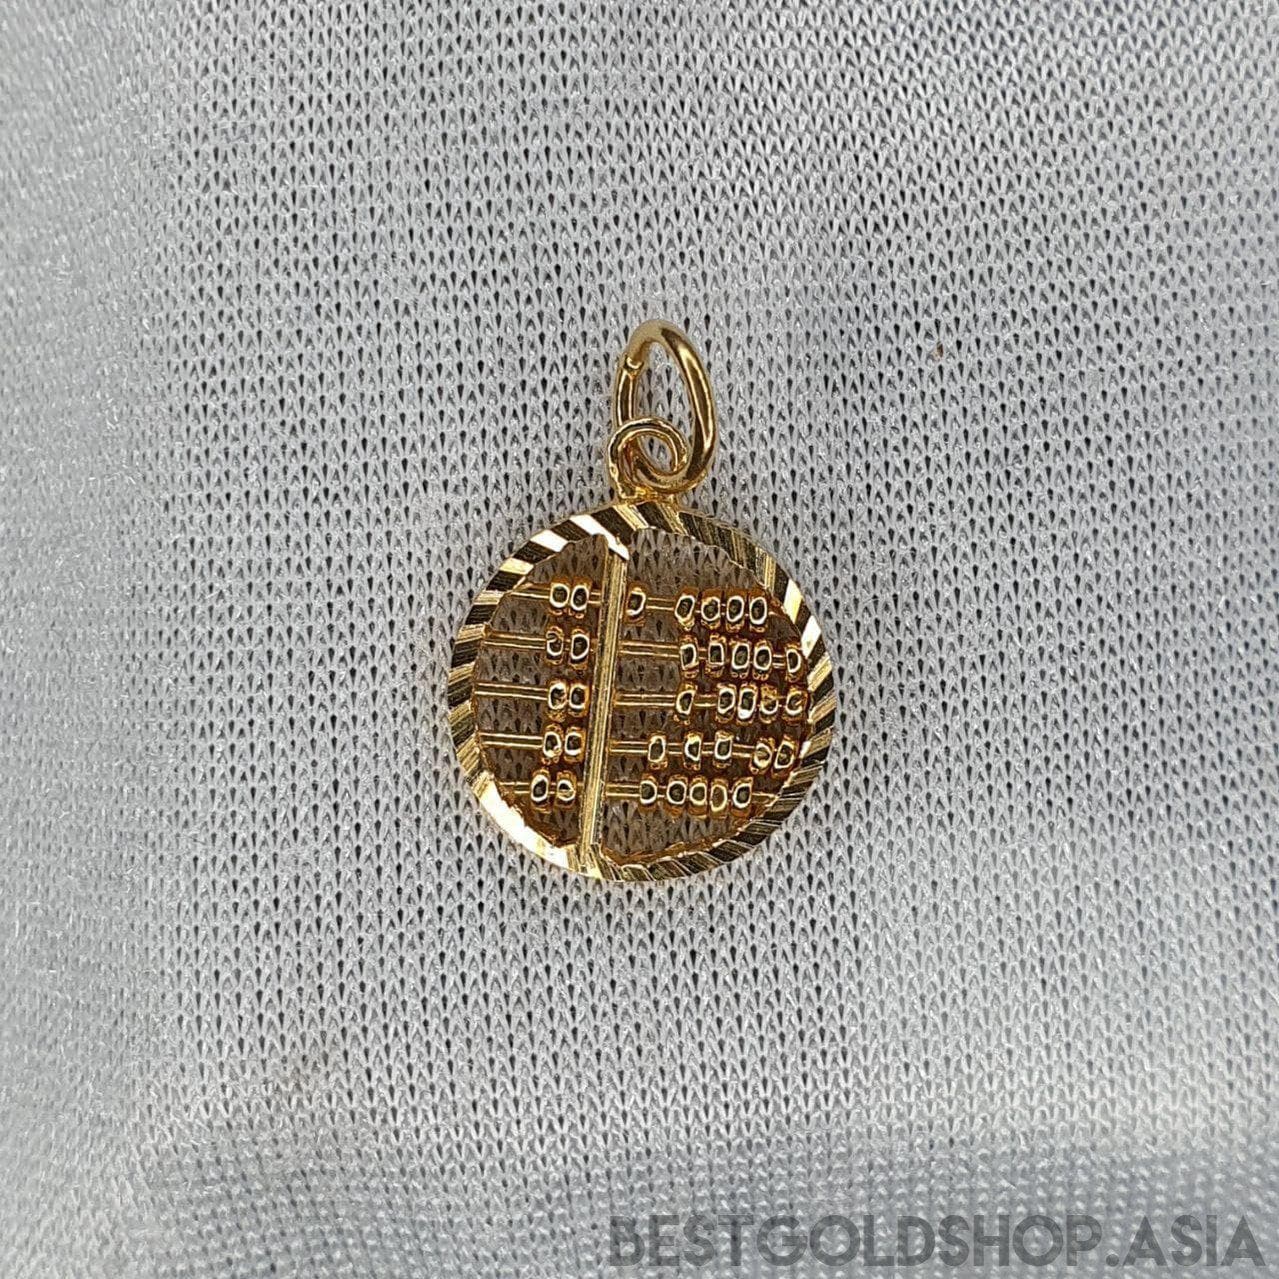 22k / 916 Gold round abacus pendant-916 gold-Best Gold Shop